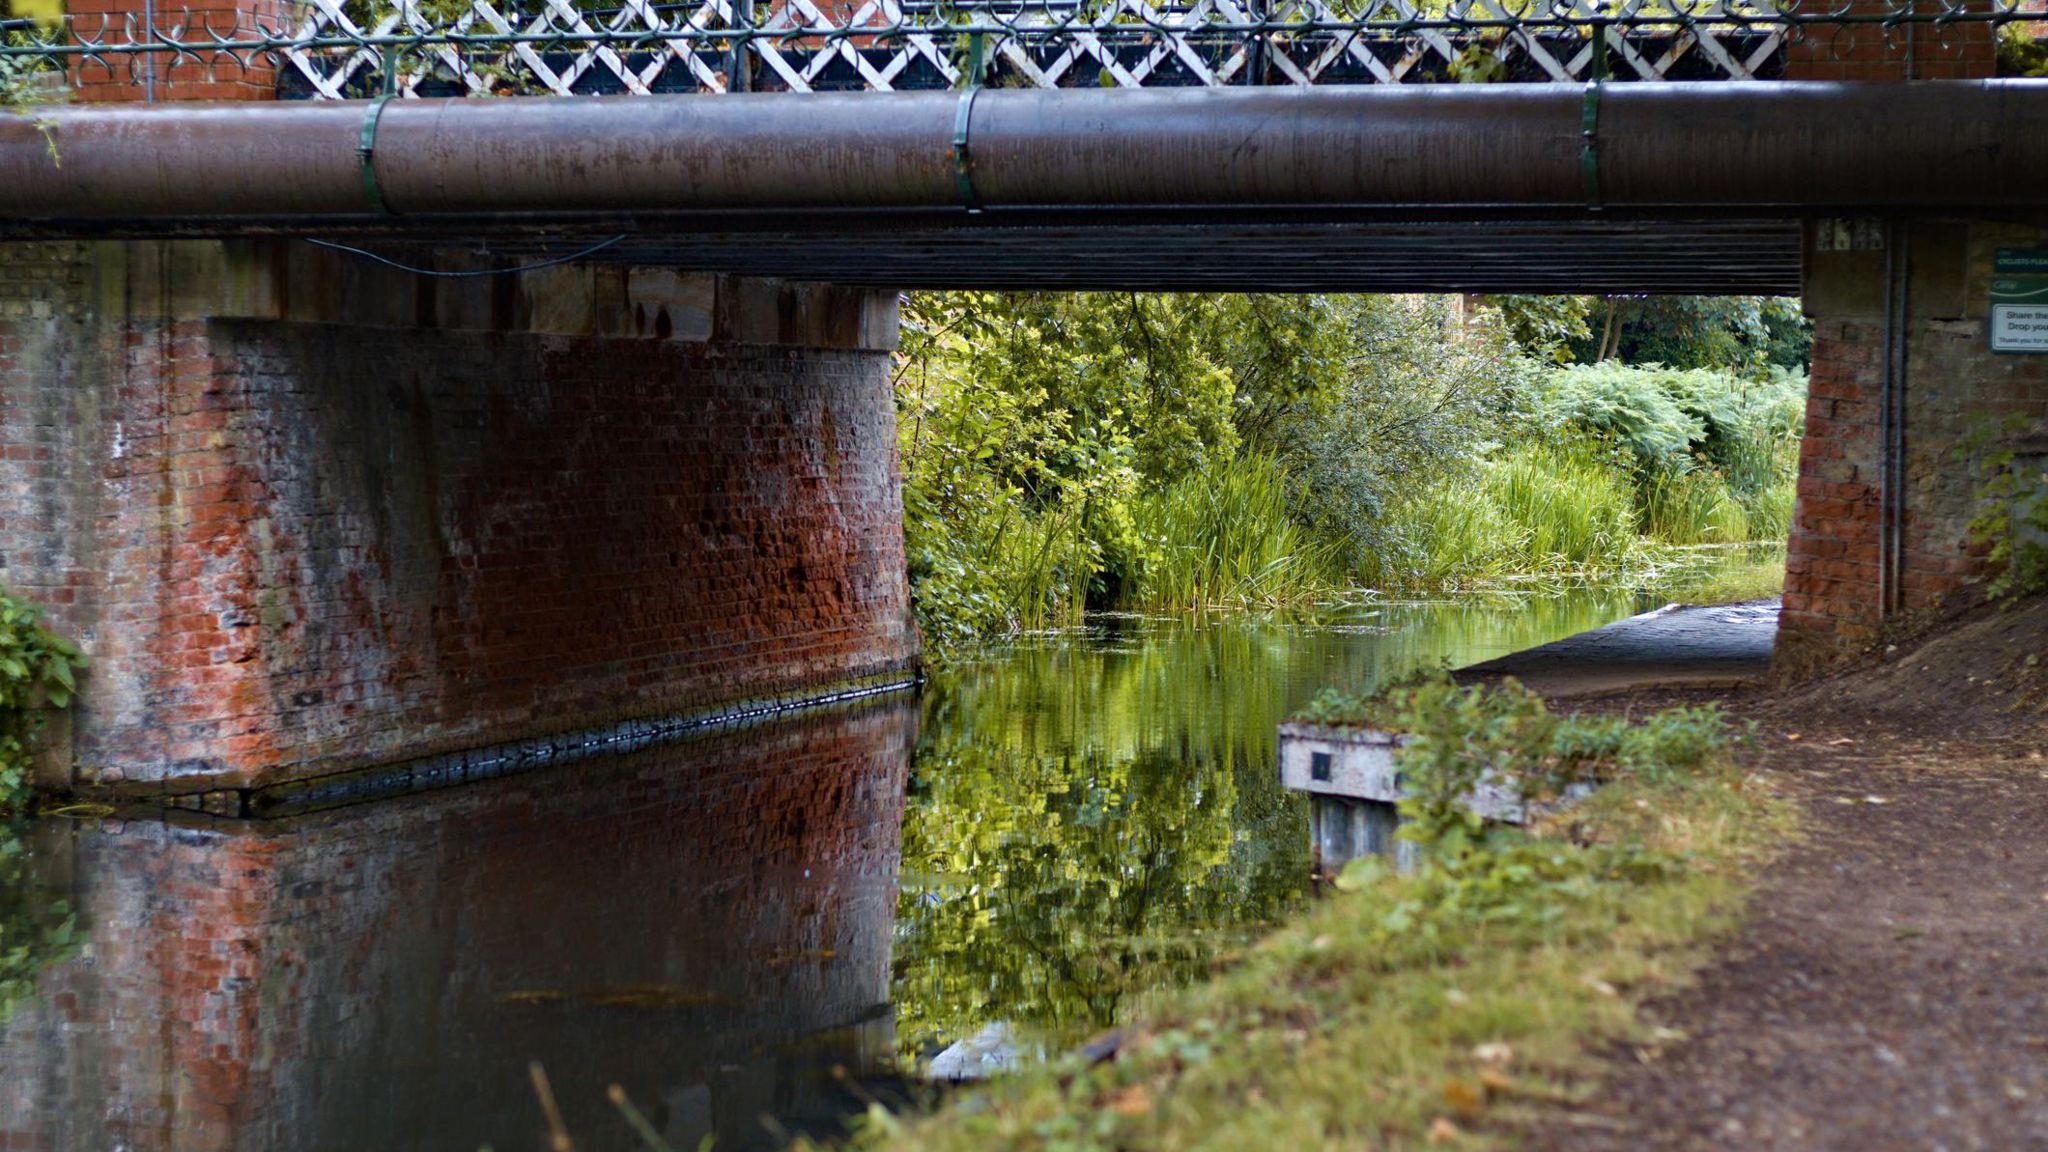 A close up of an old brick built bridge over a canal, with greenery in the distance and the towpath to the right